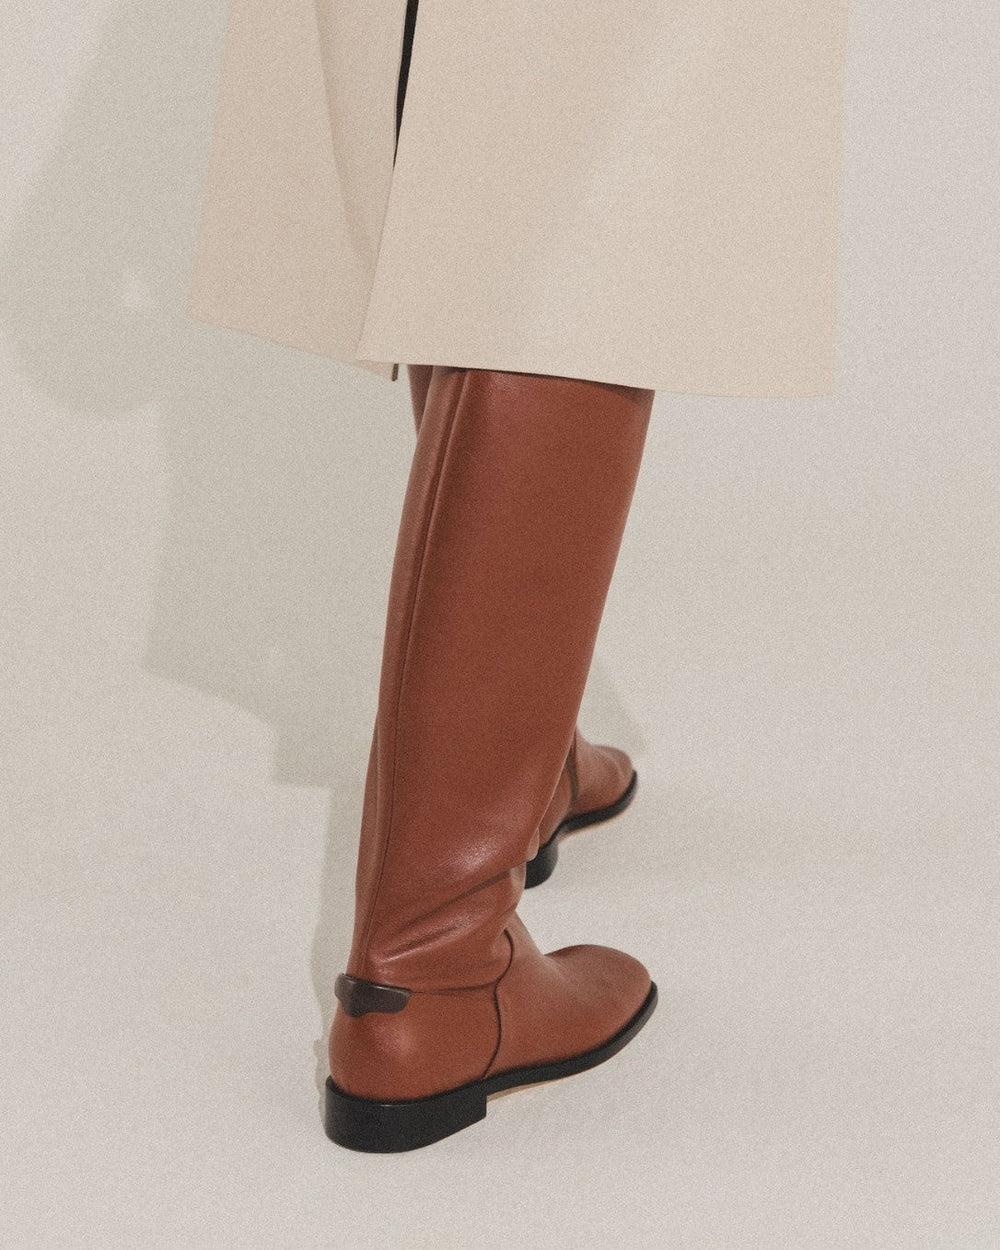 Hand-crafted in Italy with artisan precision, Jia draws on the equestrian boot with a chic knee-high silhouette and subtle seamwork. Promising enduring investment style, our buffed and beautifully supple terracotta calfskin leather takes the spotlight here, while an internal zipper ensures a slim fit that will slip under dresses or trousers with ease.